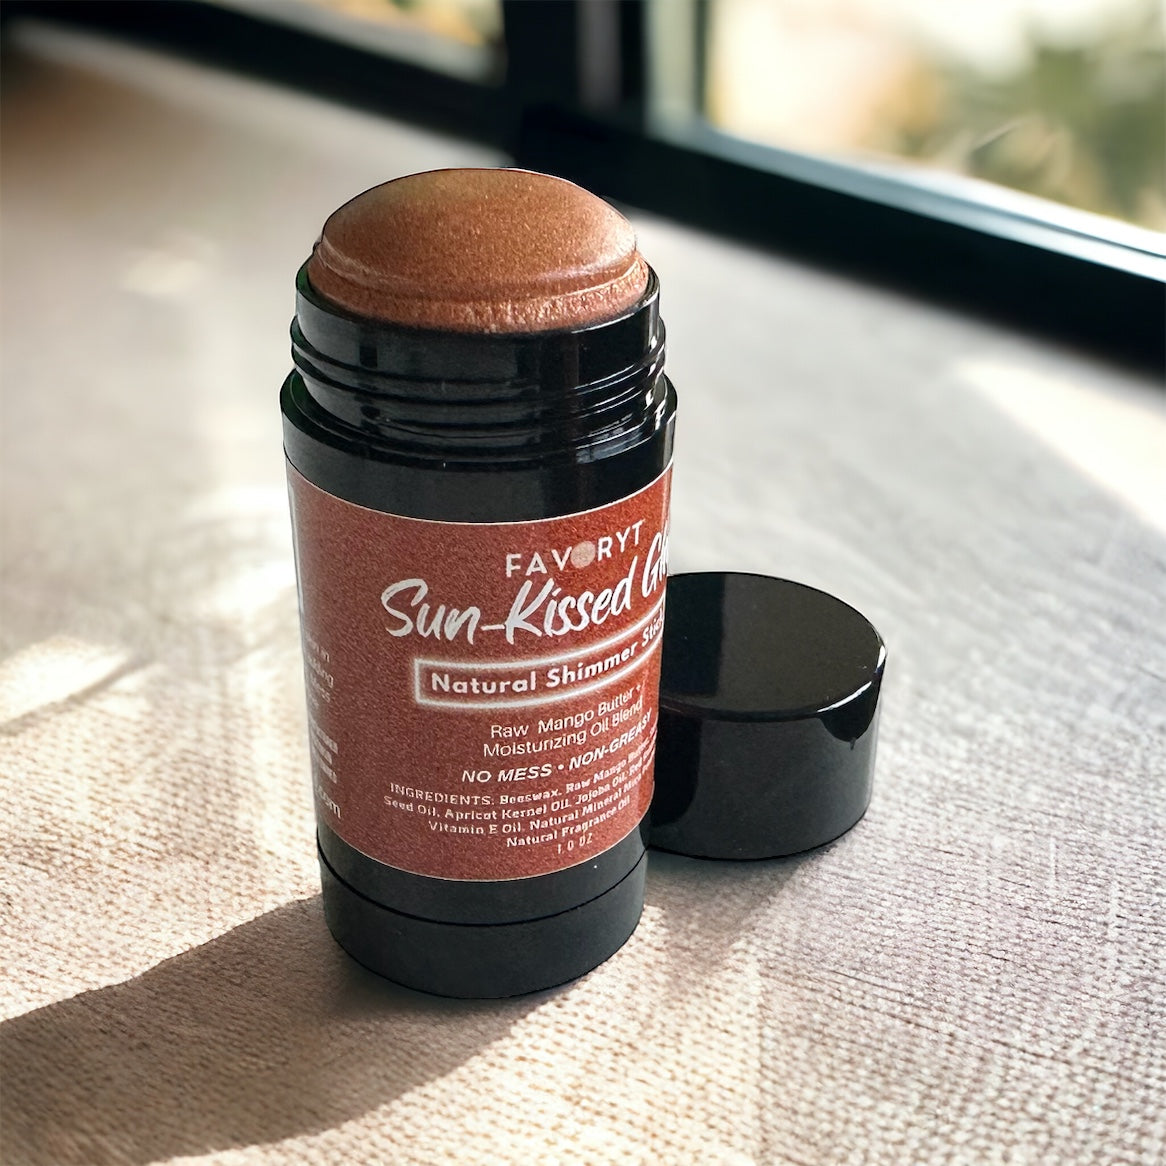 *NEW Sun-Kissed Glow Natural Shimmer Skin Balm Stick